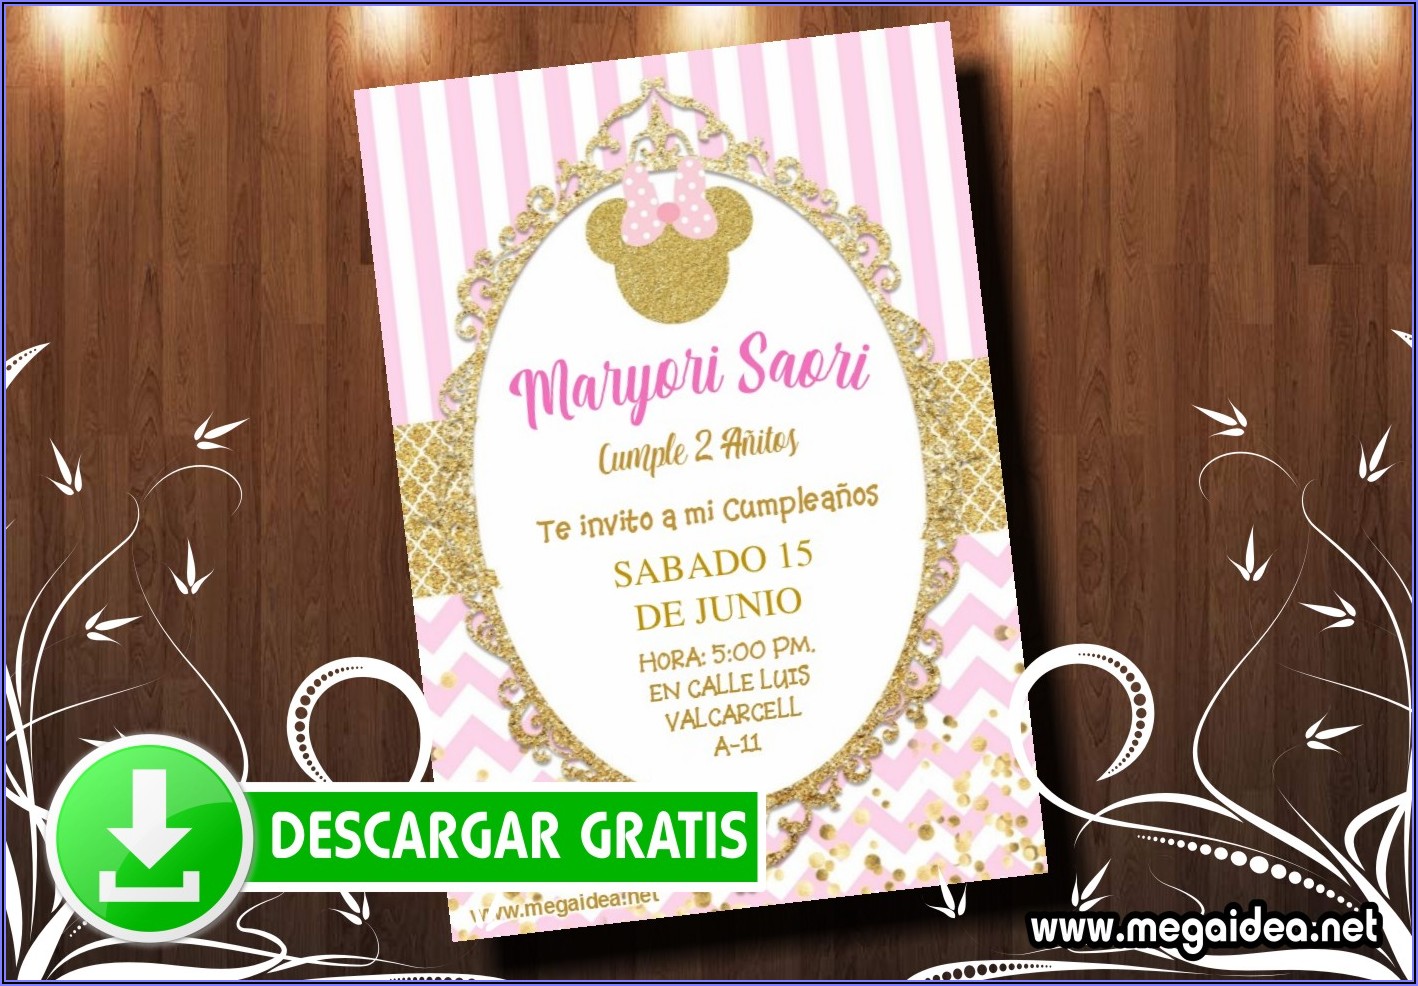 Minnie Mouse Invitation Template Pink And Gold